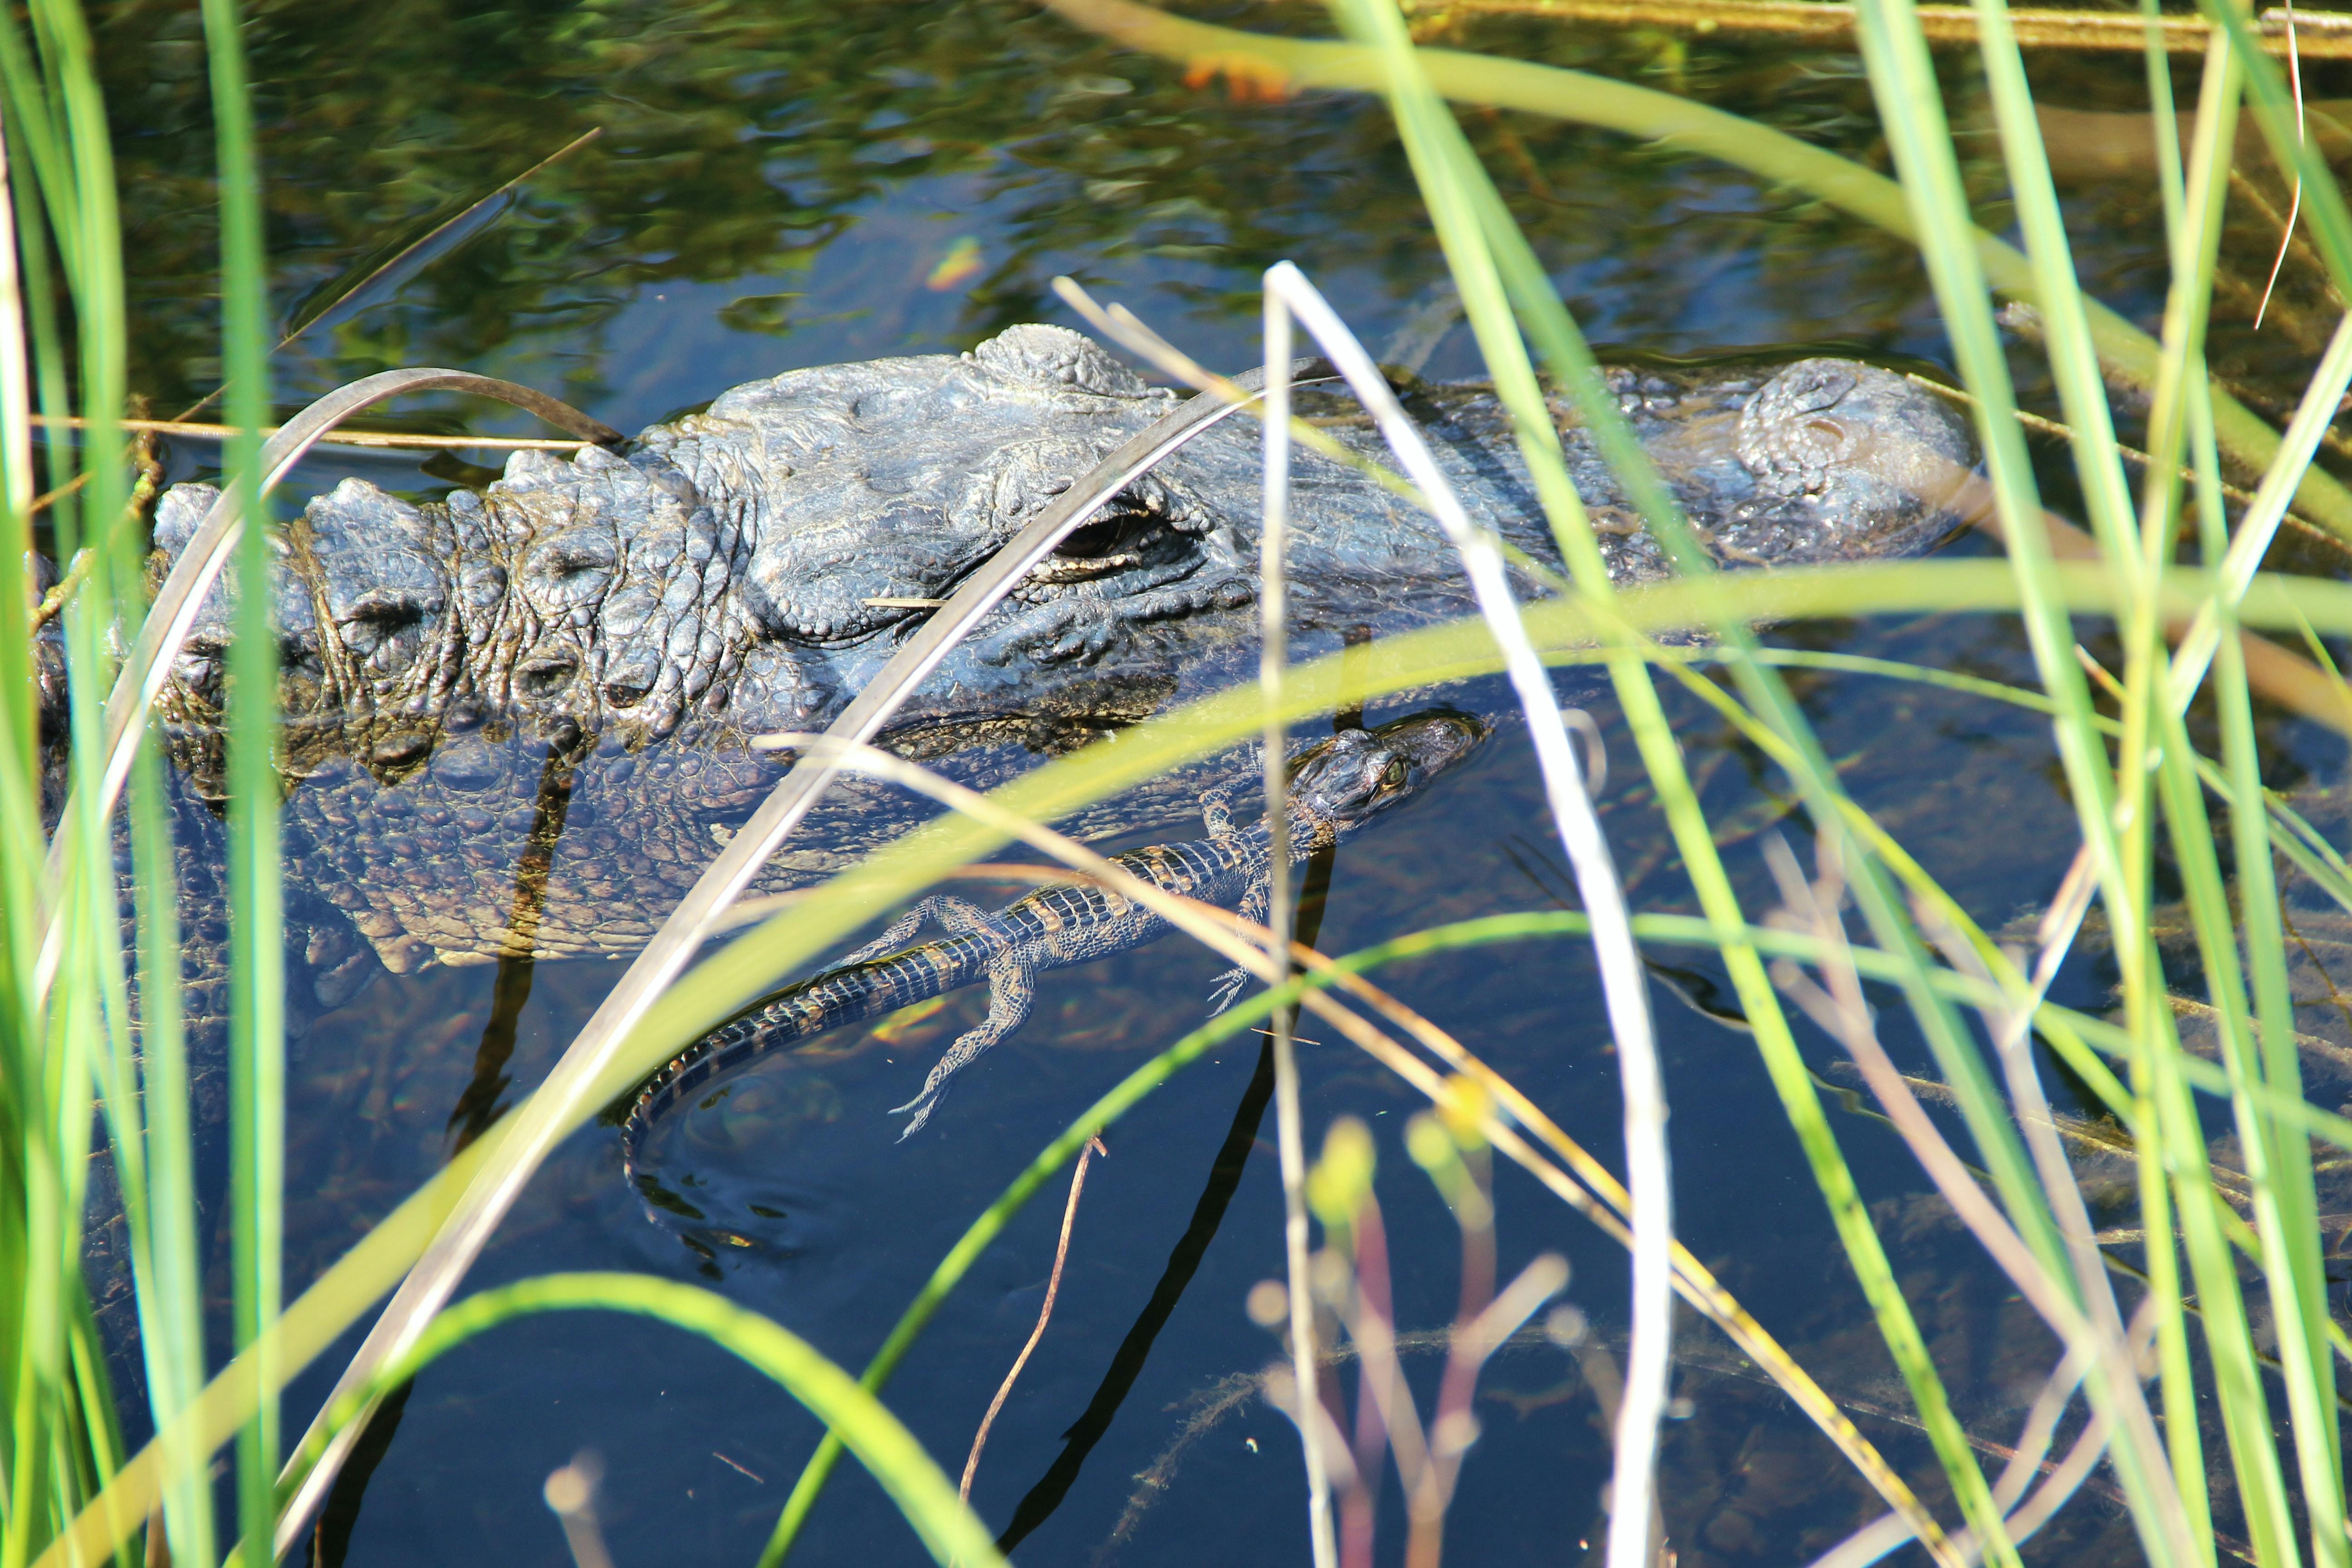 A baby gator floating next to its mother's head at the surface of a swamp